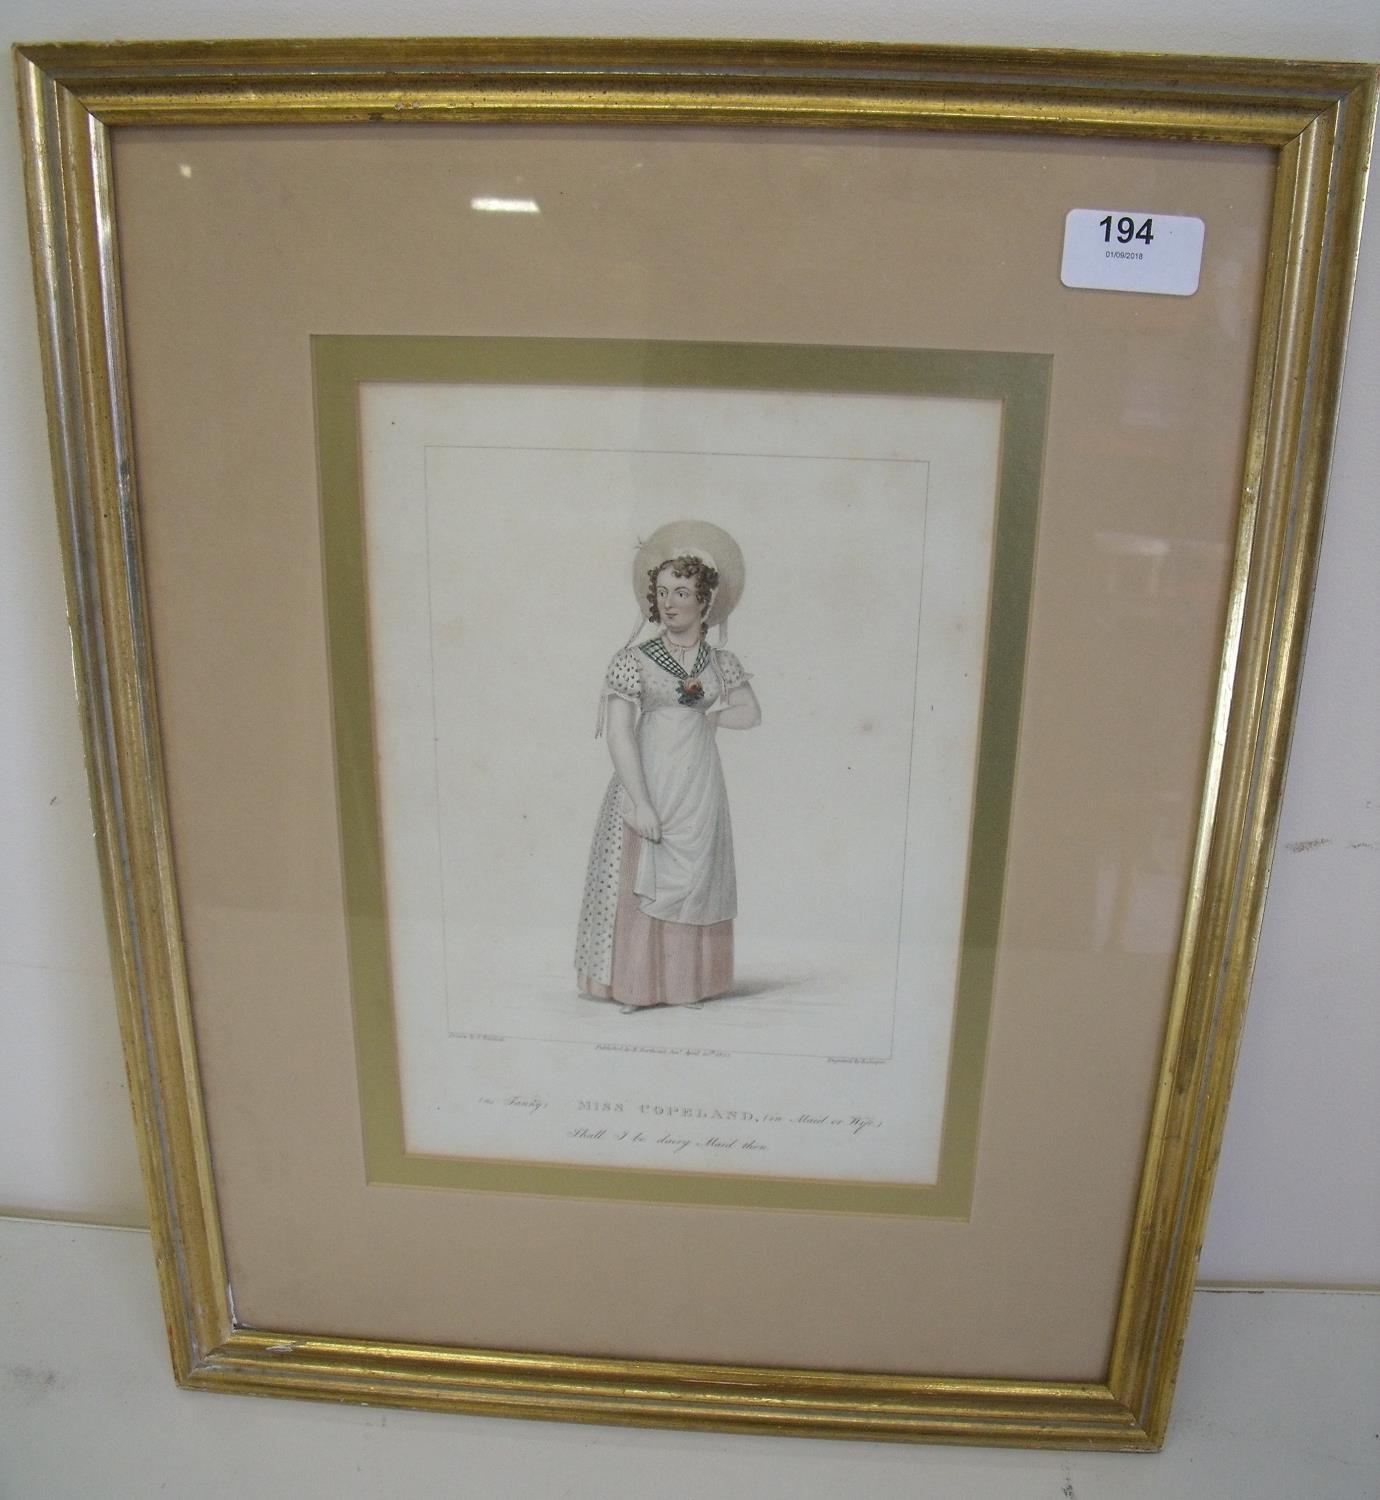 Gilt framed and mounted coloured print by E. Waldeck published by H. Berthound April 20th 1822